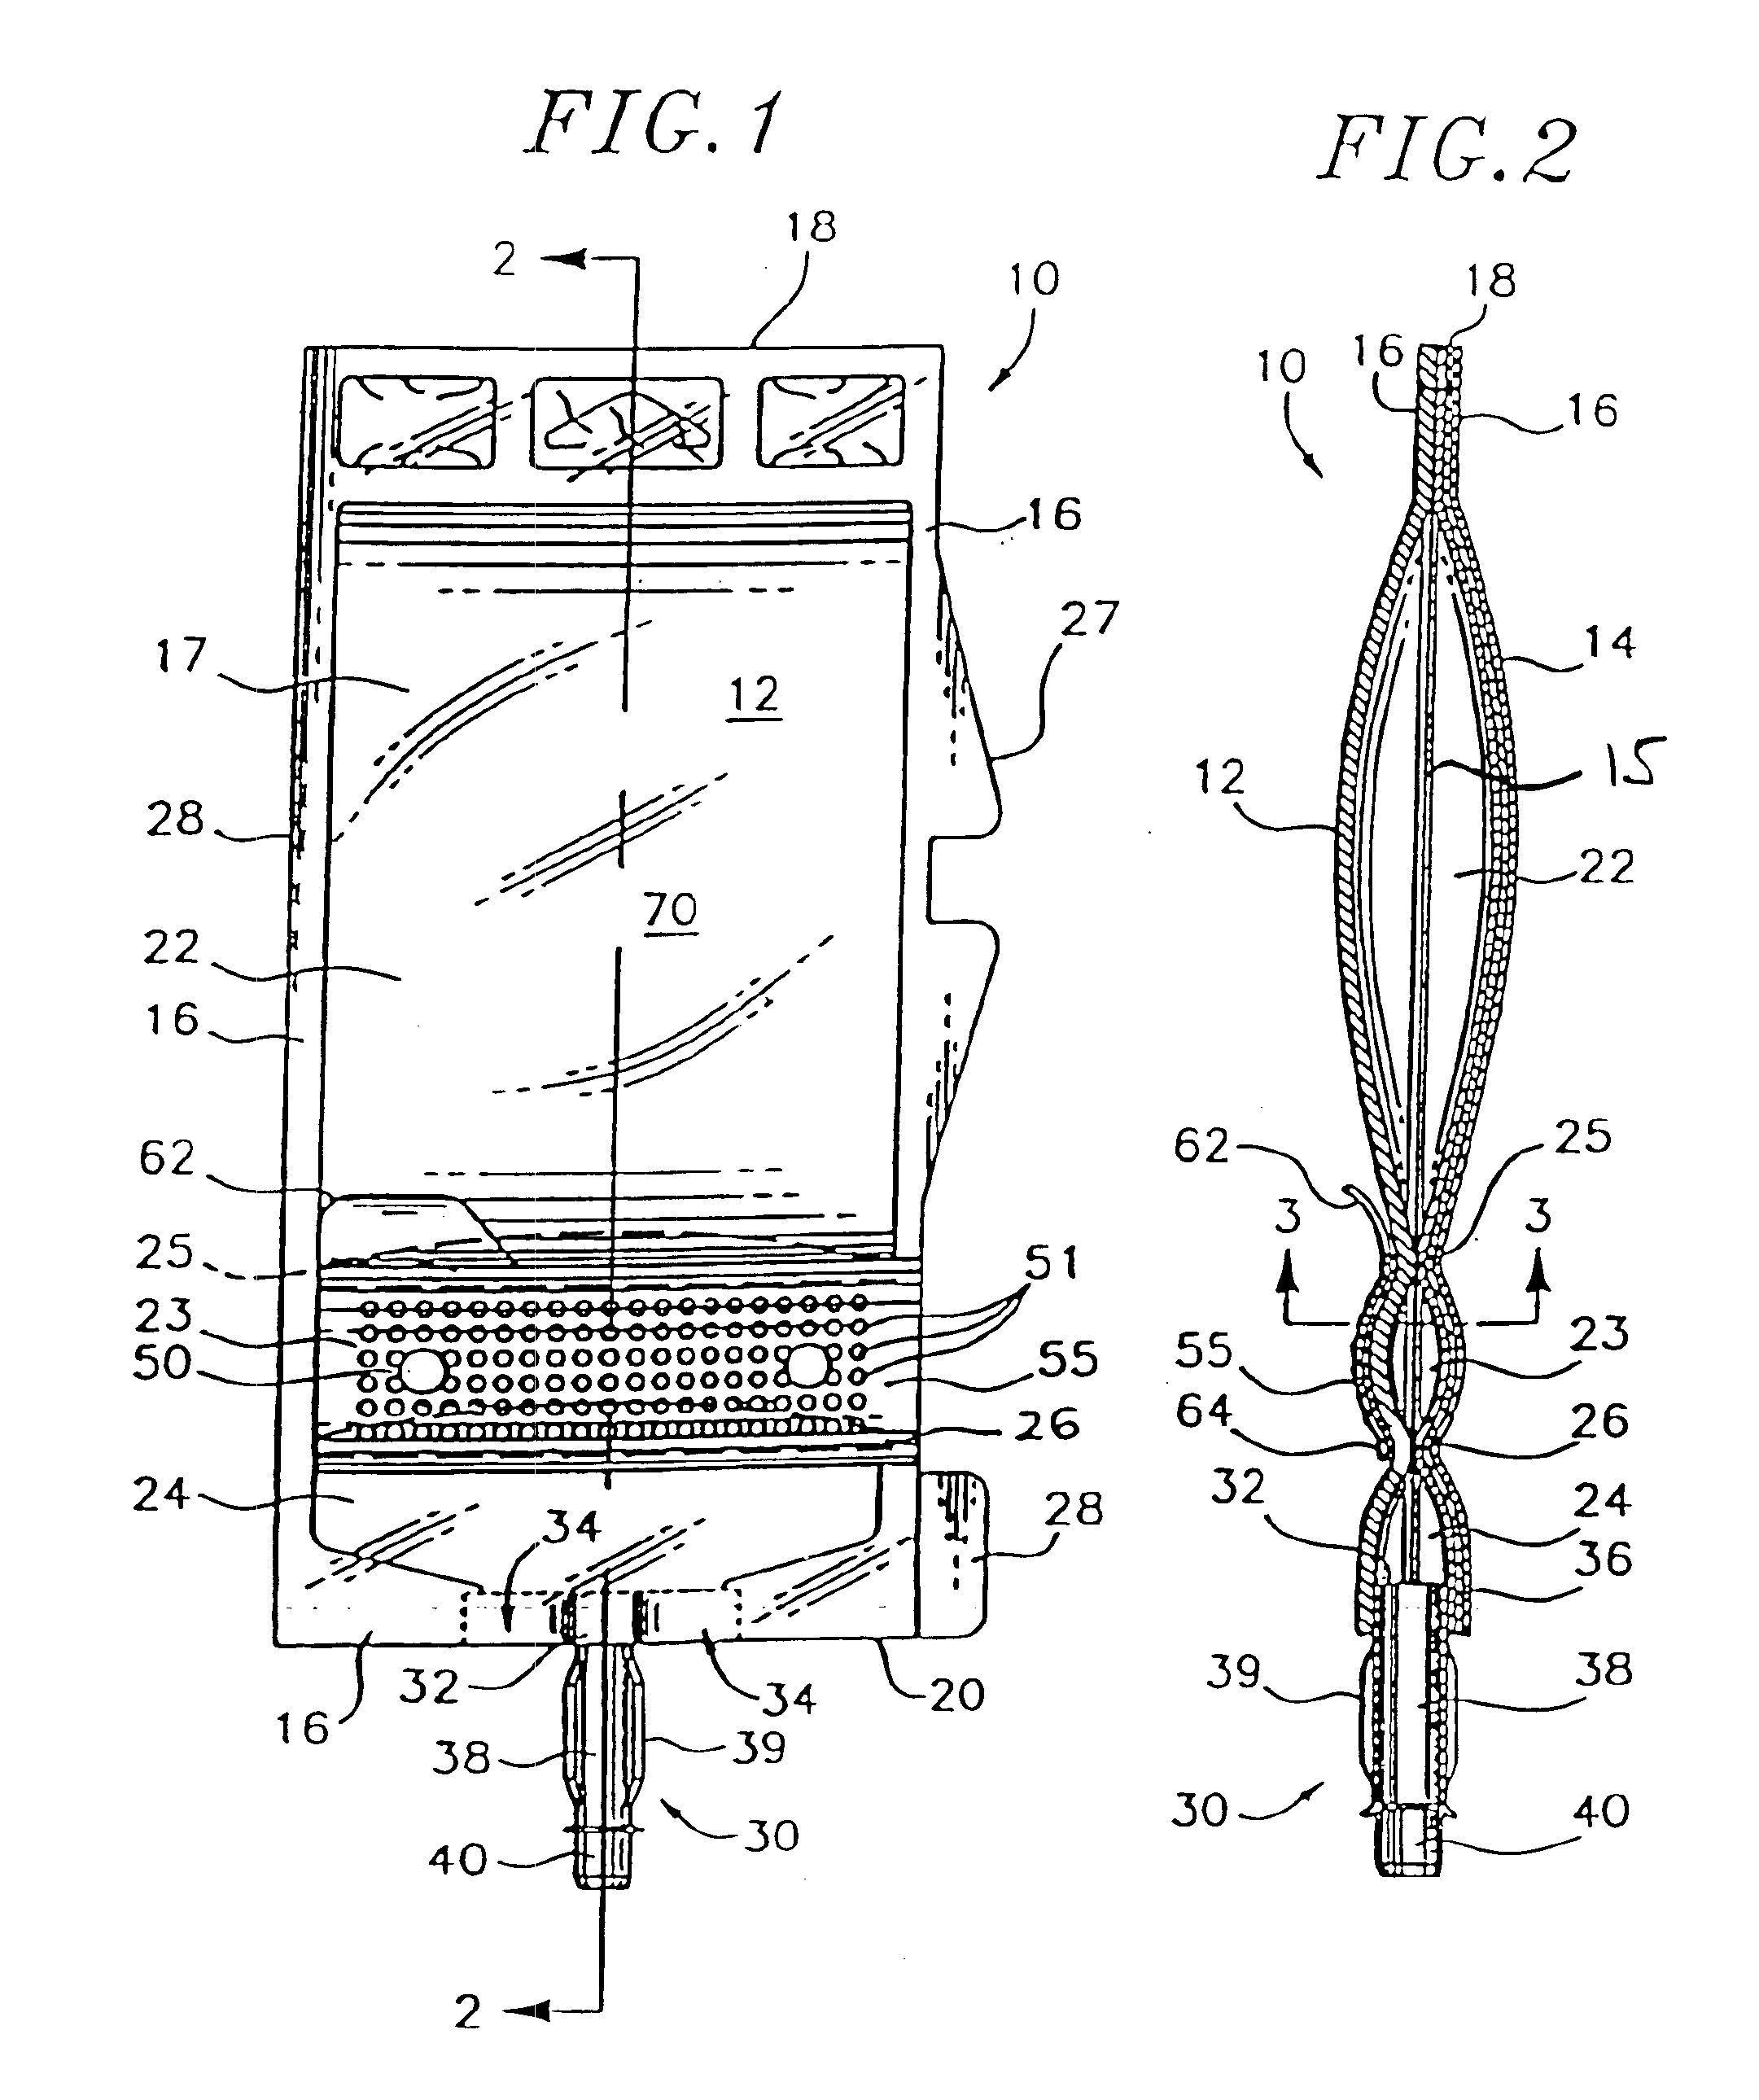 Flexible multi-compartment container with peelable seals and method for making same